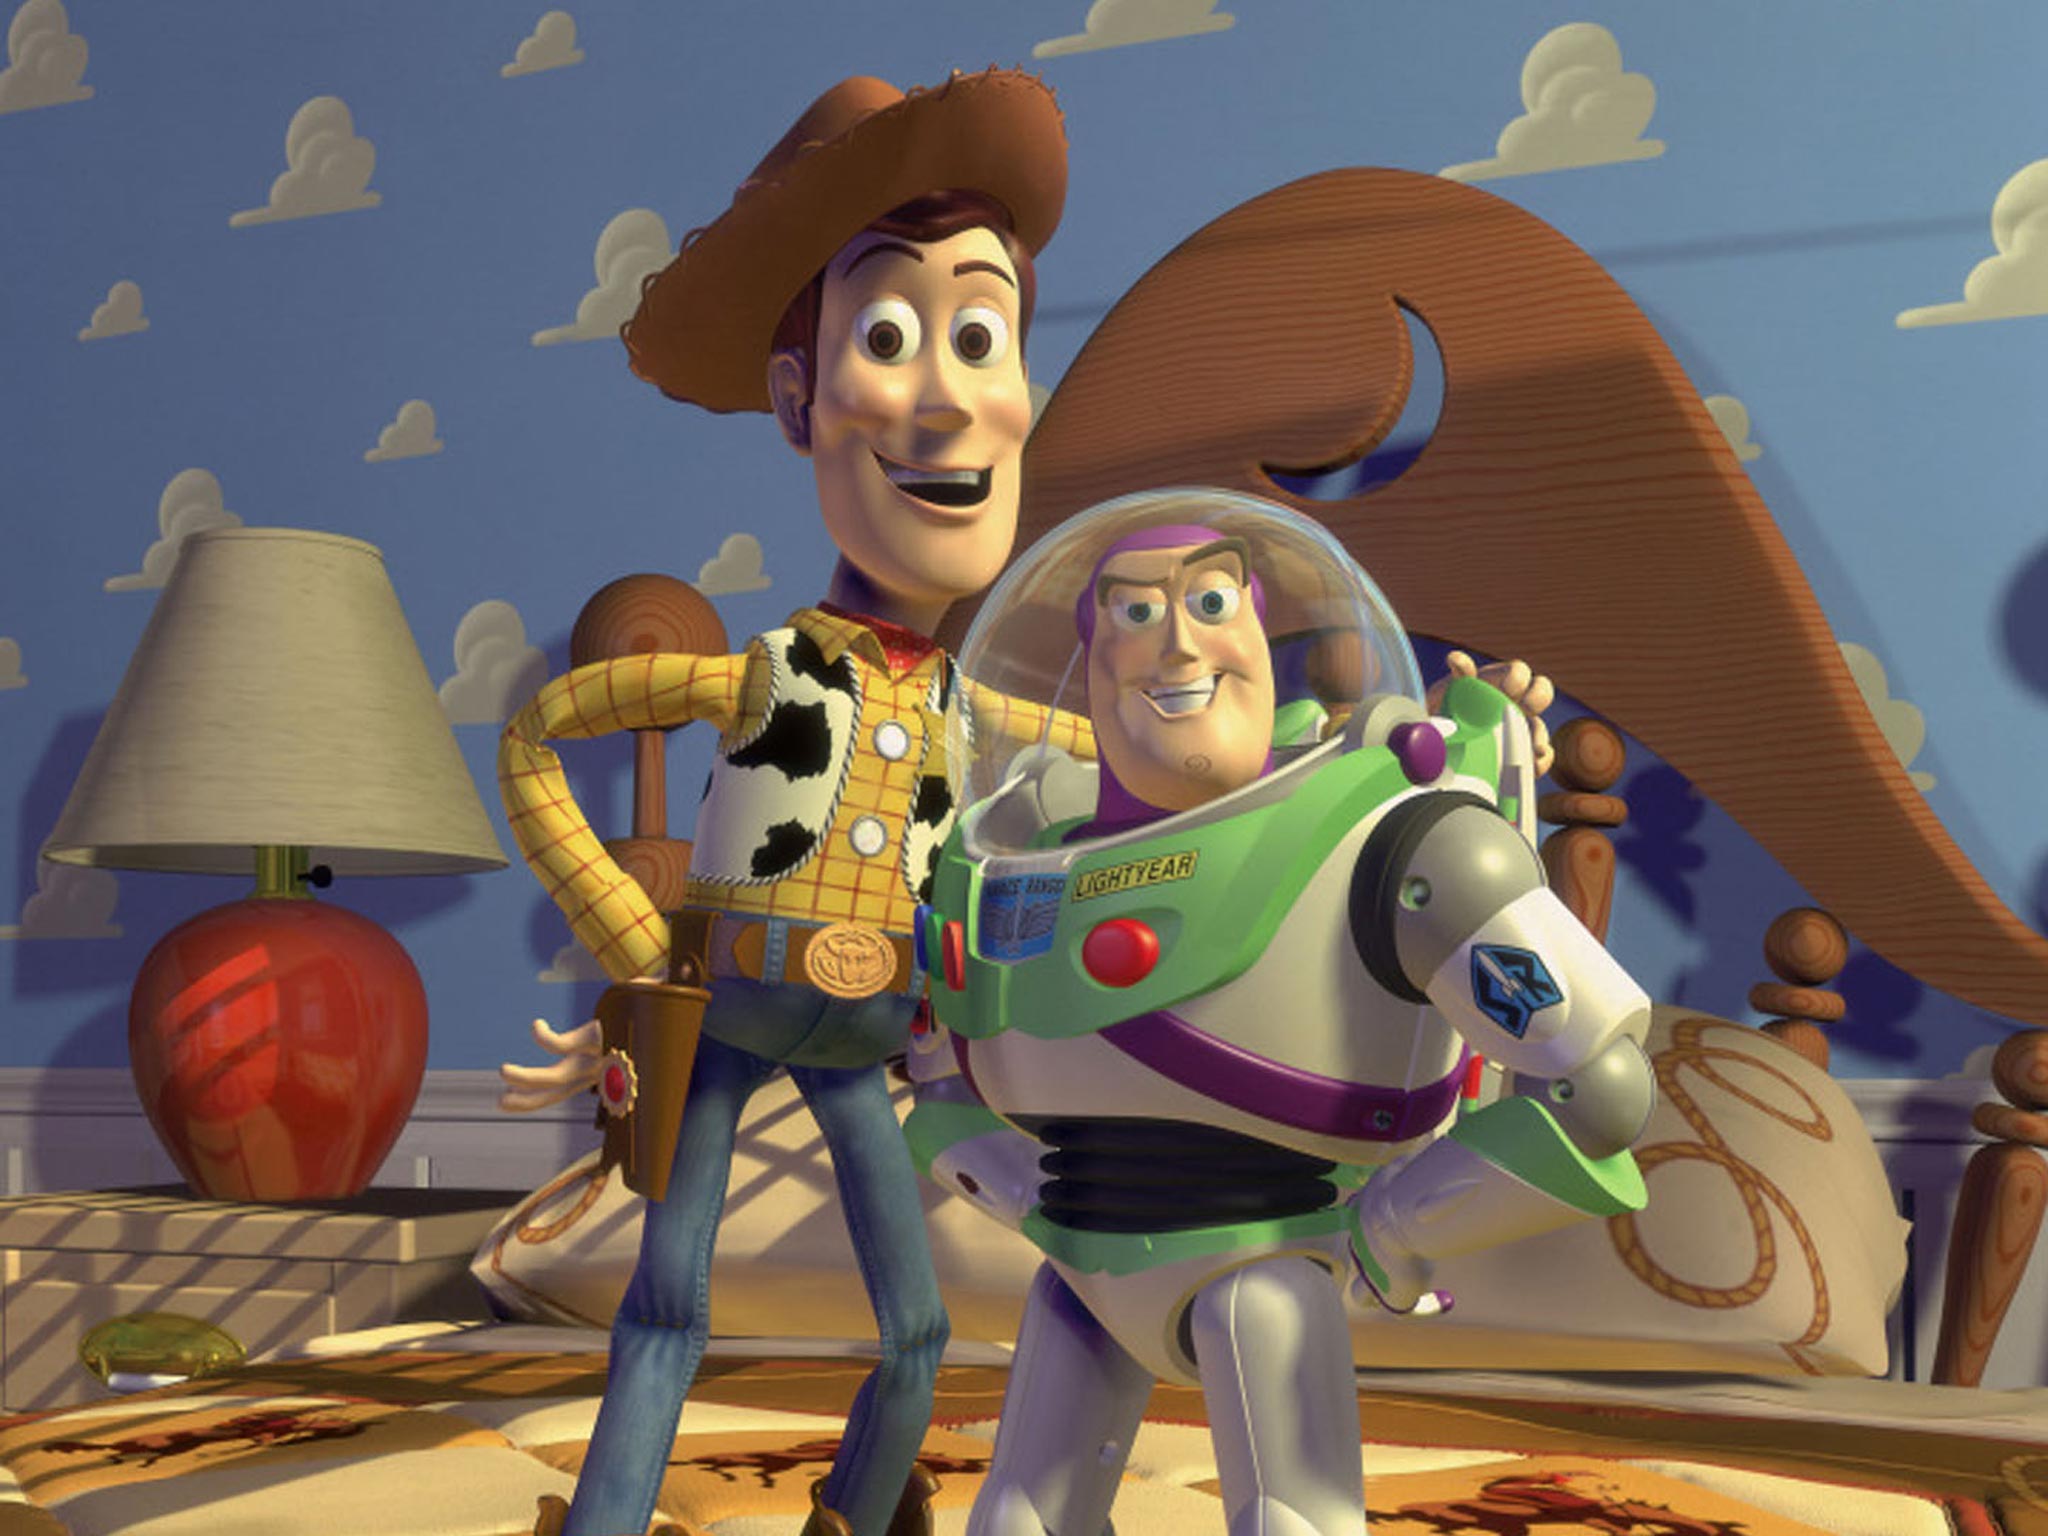 A still from Disney's first CGI film Toy Story in 1995